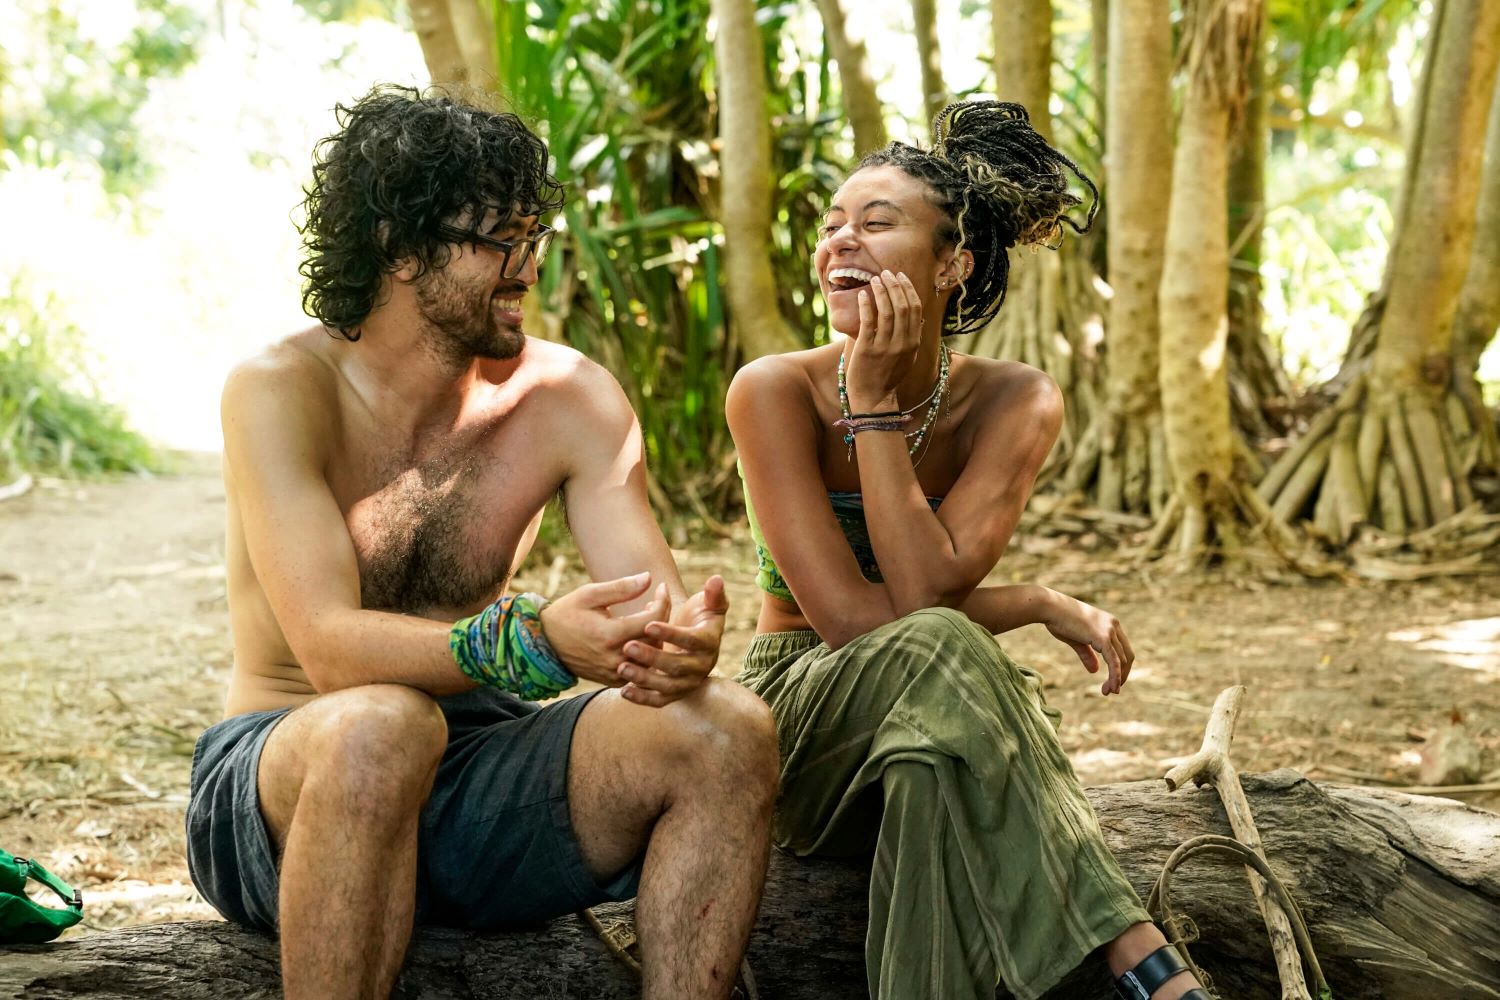 Matt Blankinship and Claire Rafson at the Soka camp in 'Survivor 44' Episode 3, 'Sneaky Little Snake.'